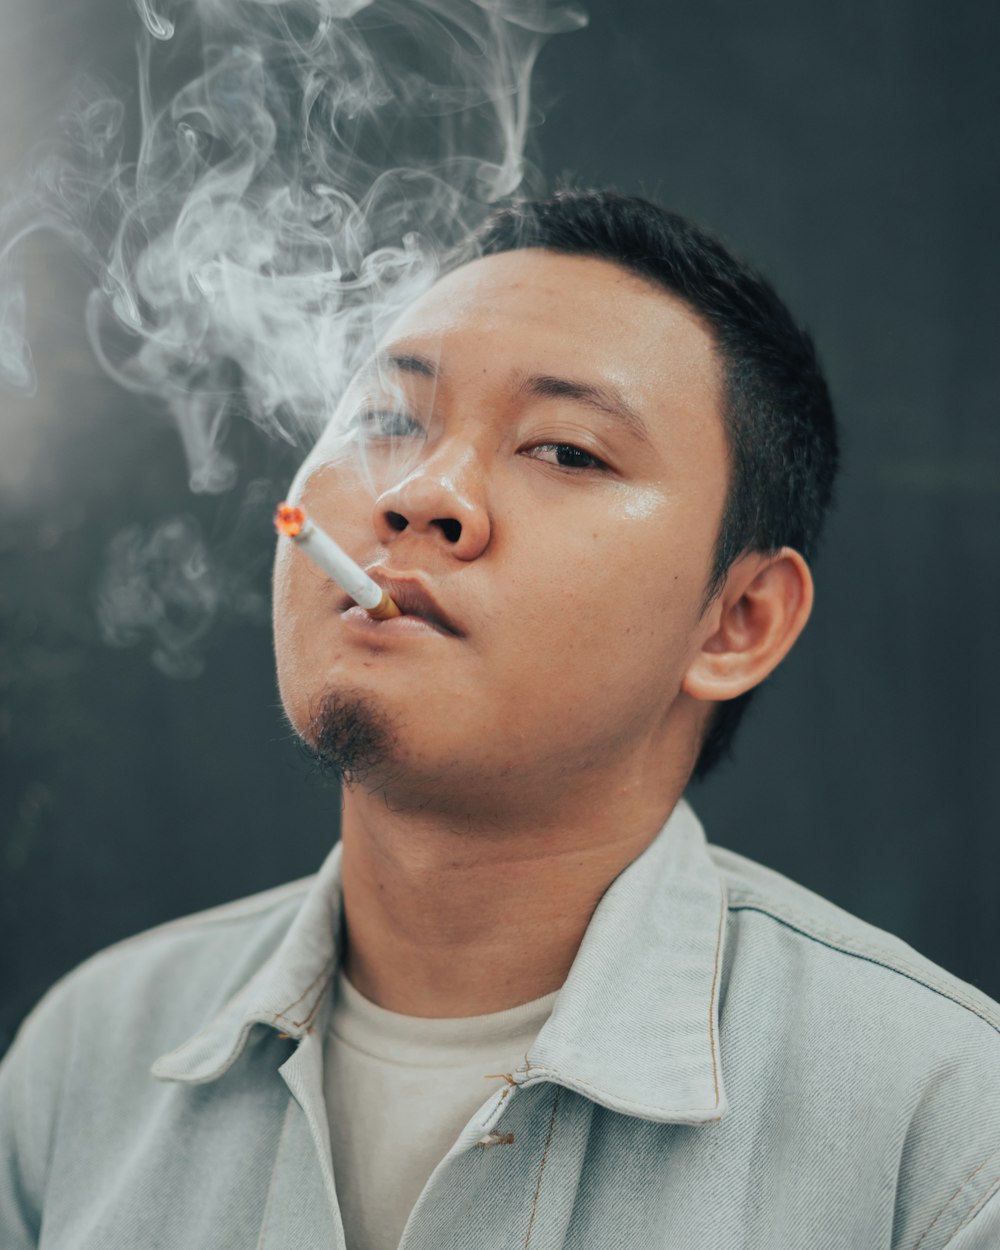 a man smoking a cigarette in front of a black background